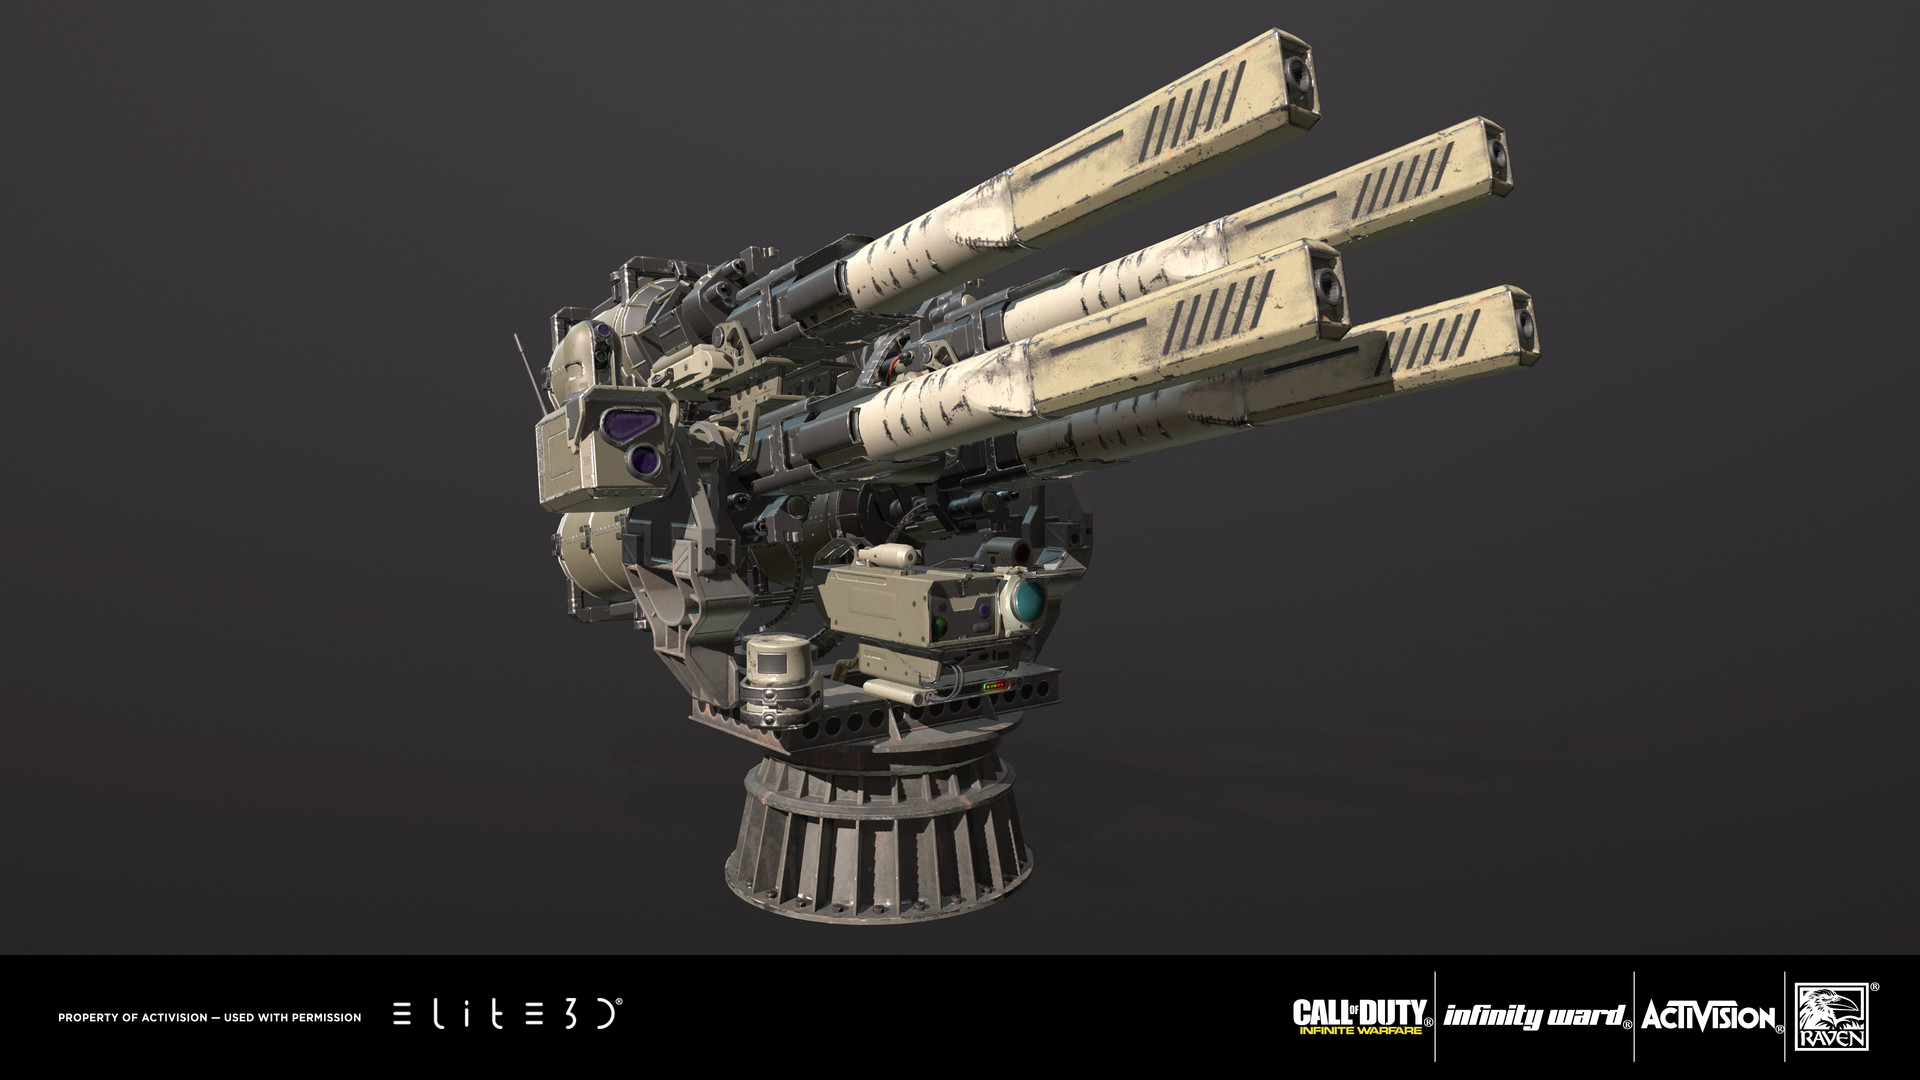 In-game Weapons  for Call of Duty: Infinite Warfare.